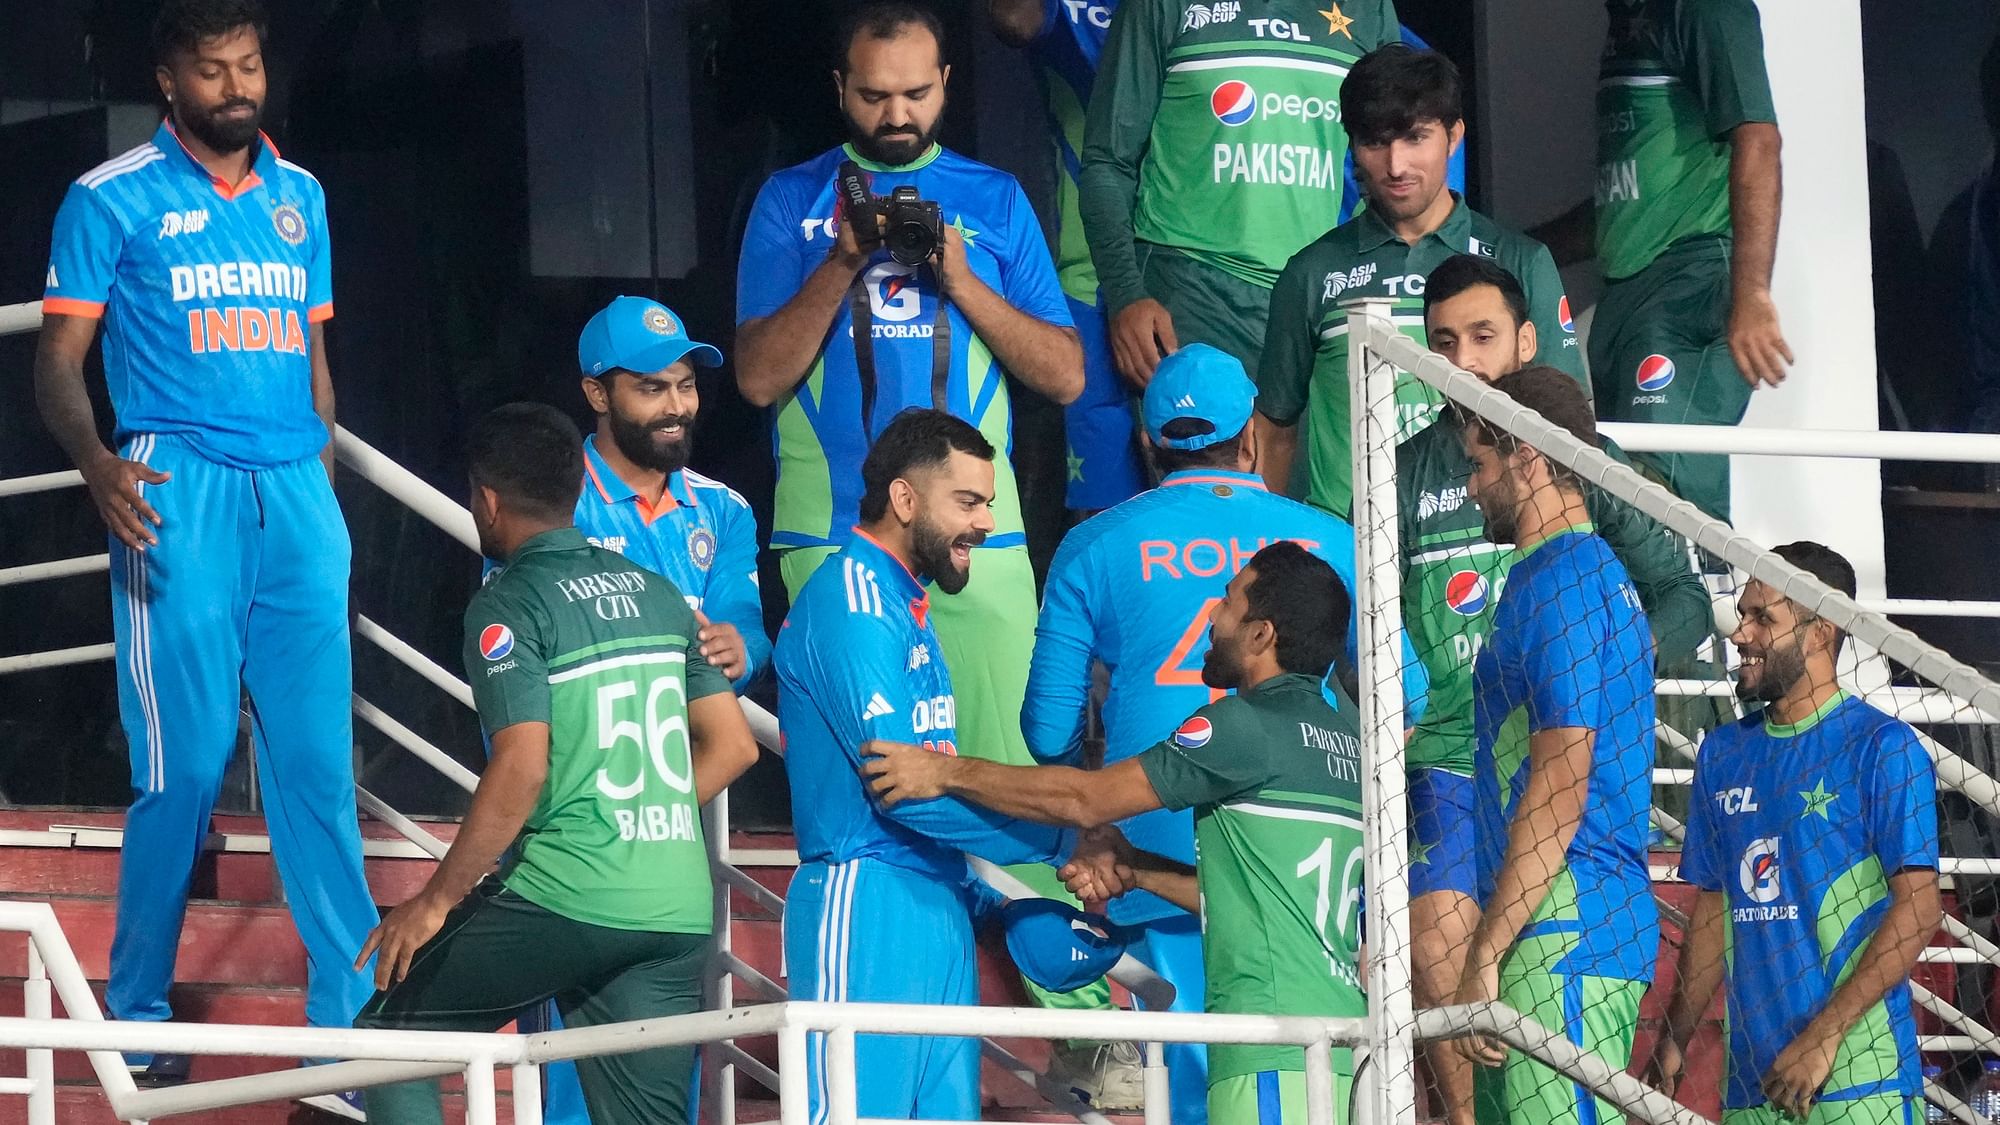 <div class="paragraphs"><p>India vs Pakistan Live Score, Asia Cup 2023:&nbsp;<a href="https://www.thequint.com/sports/cricket/india-vs-pakistan-4-players-who-could-be-kingmakers-dealbreakers-asia-cup-2023-ishan-kishan">India</a> and <a href="https://www.thequint.com/sports/cricket/asia-cup-2023-pakistan-preview-strengths-weaknesses-odi-number-one-ranked-icc">Pakistan</a> earned one point apiece in the third match of the 2023 <a href="https://www.thequint.com/topic/asia-cup">Asia Cup</a>, at the Pallekele International Cricket Stadium.</p></div>